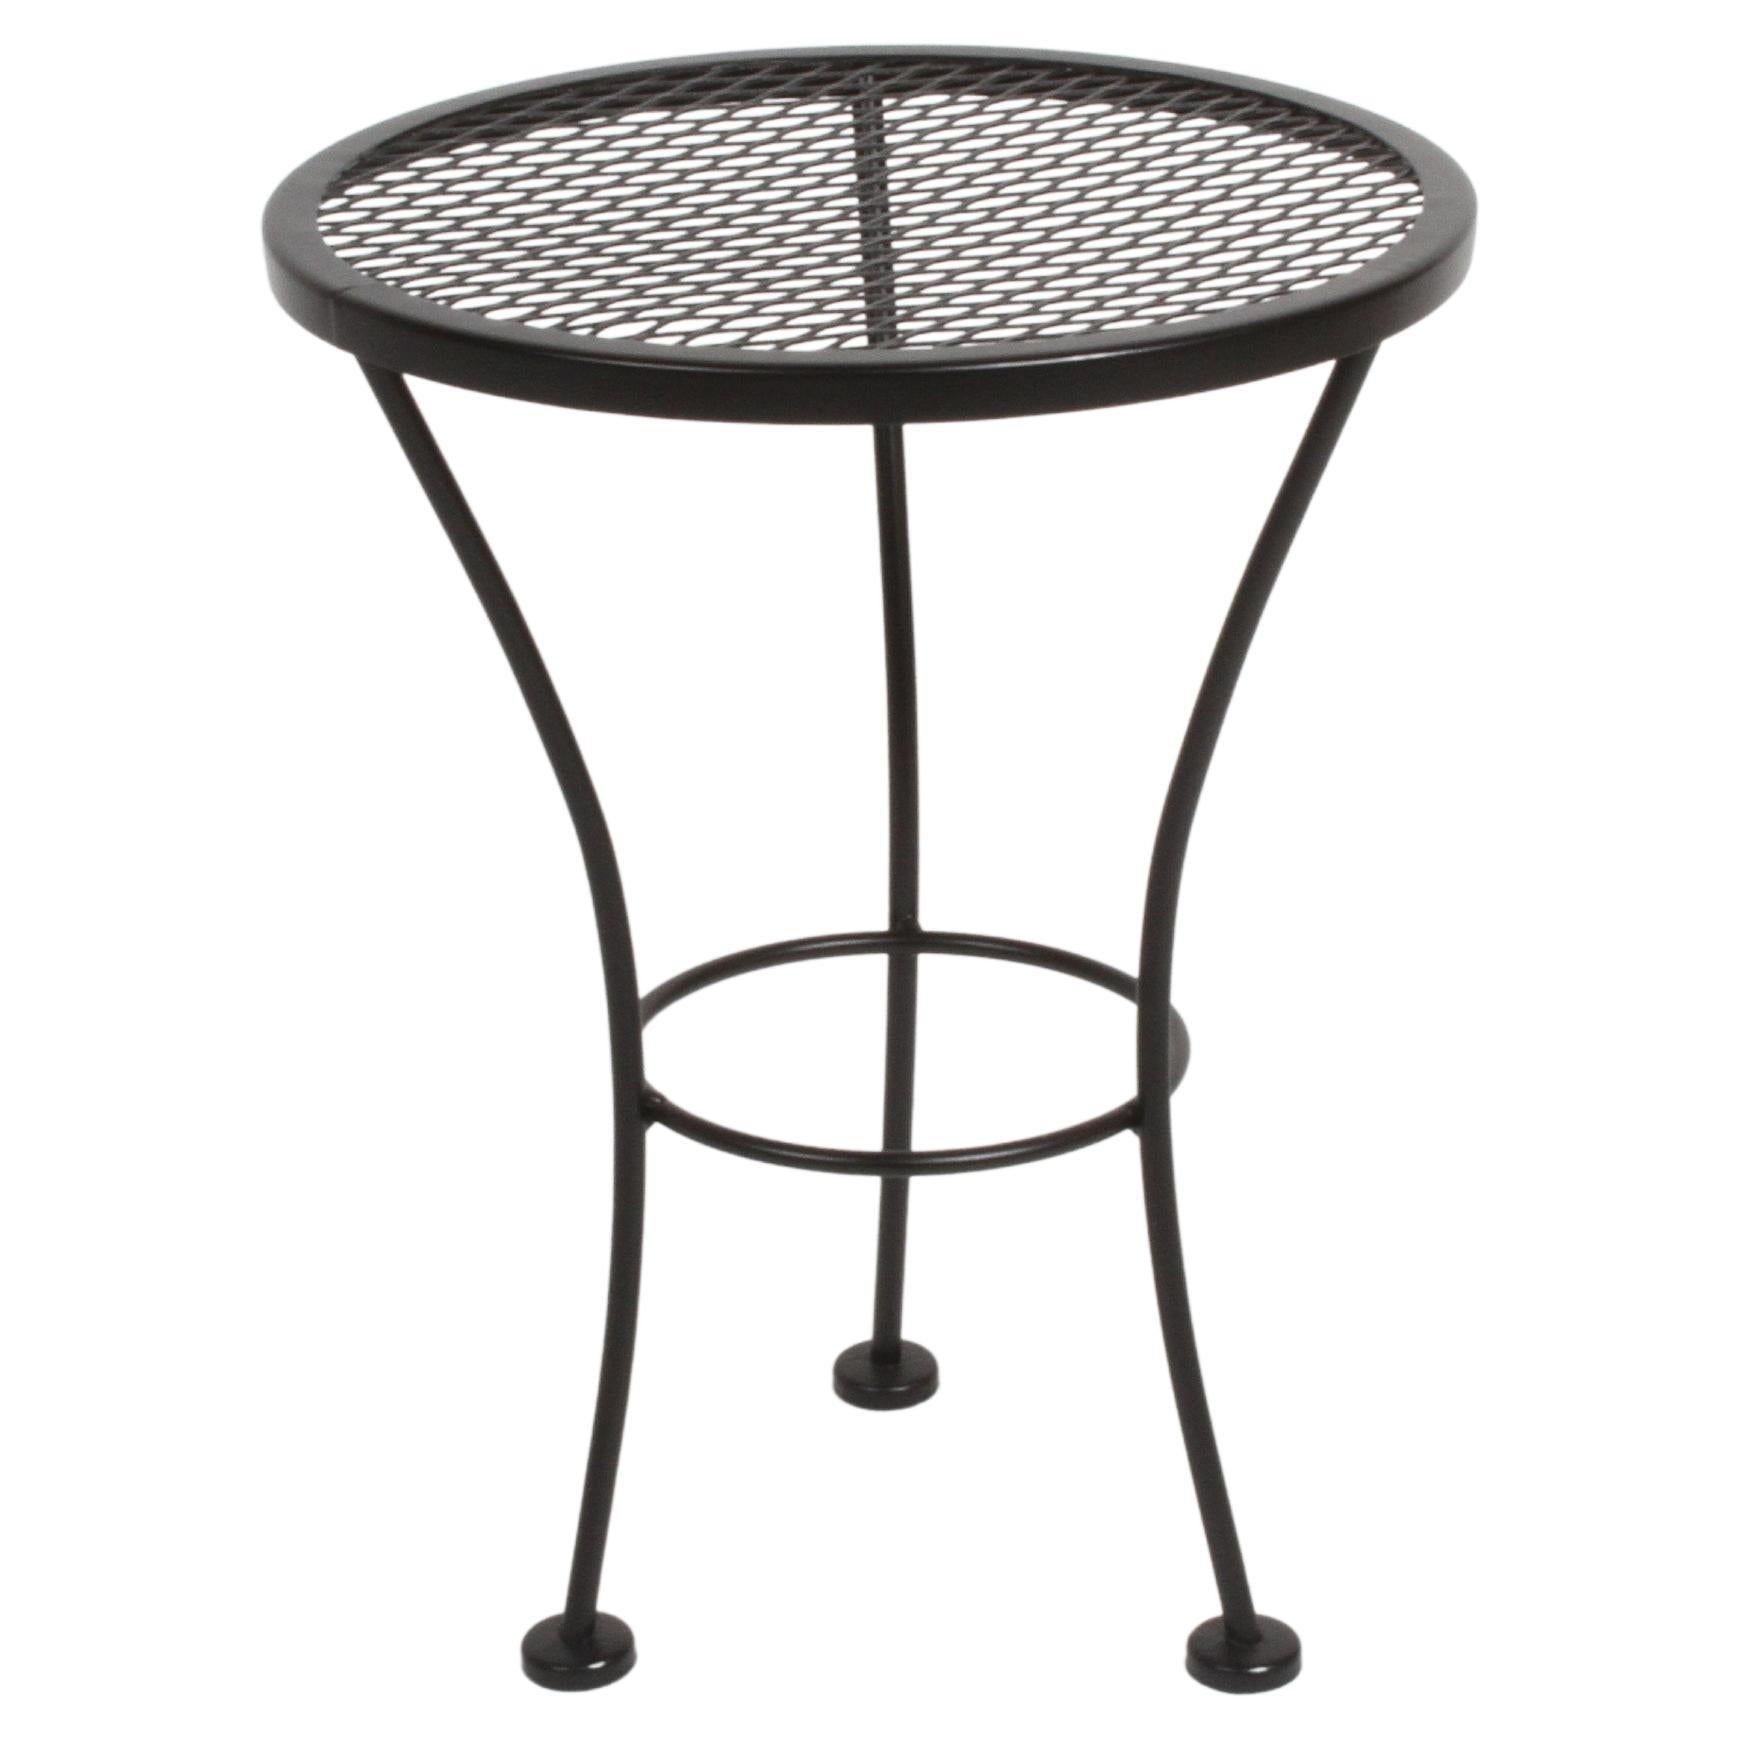 Russell Woodard Round Black Wrought Iron & Mesh Patio Side Table or Drinks Stand